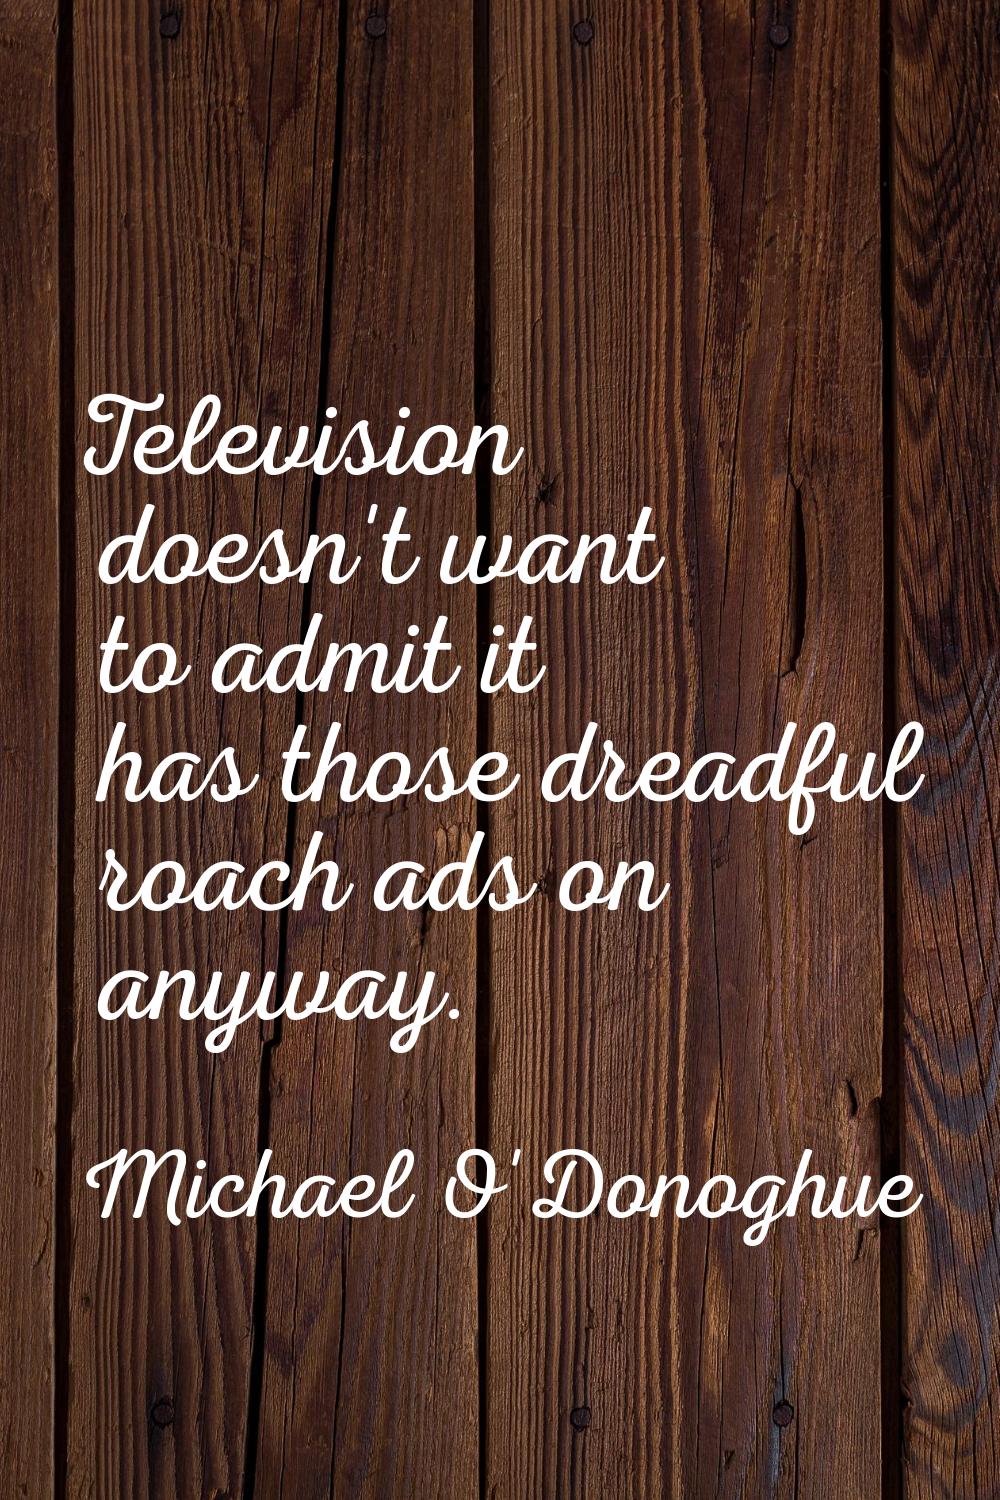 Television doesn't want to admit it has those dreadful roach ads on anyway.